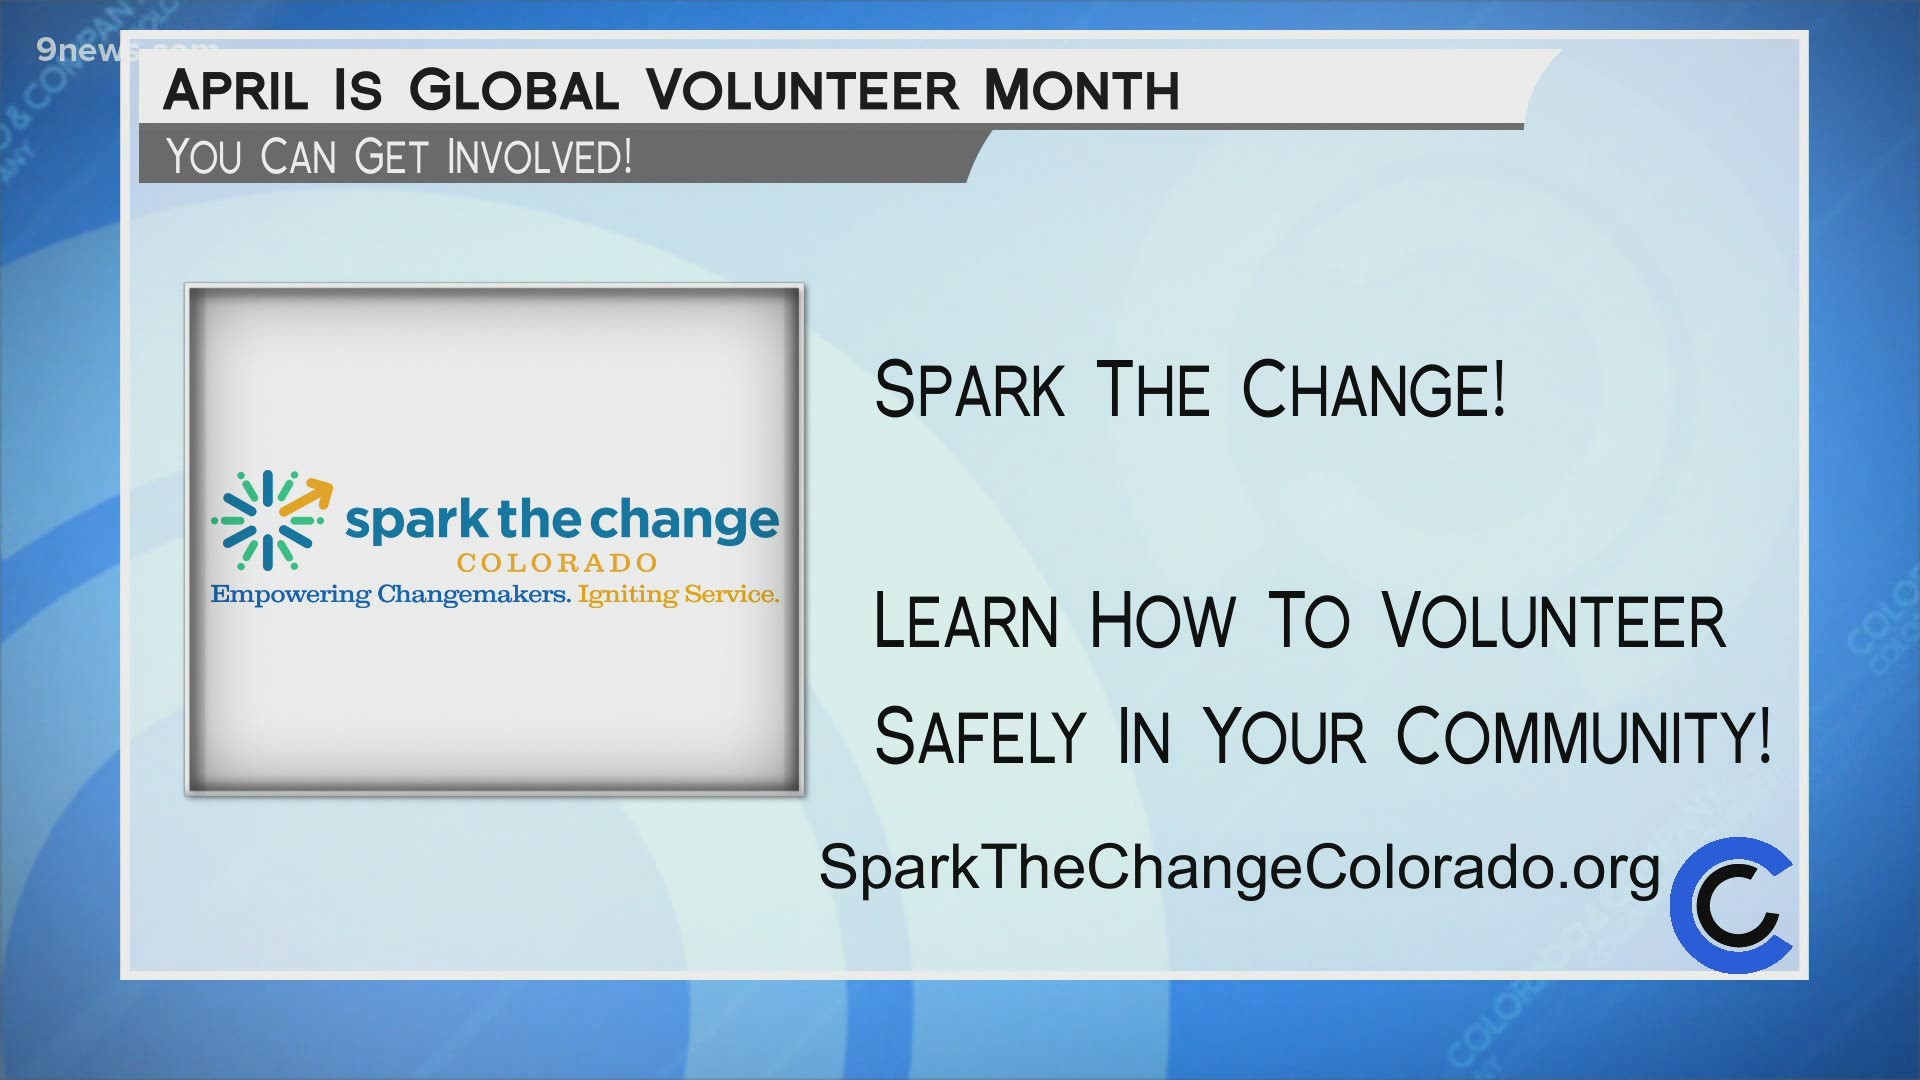 Learn more about volunteering safely in your community at SparkTheChangeColorado.org.